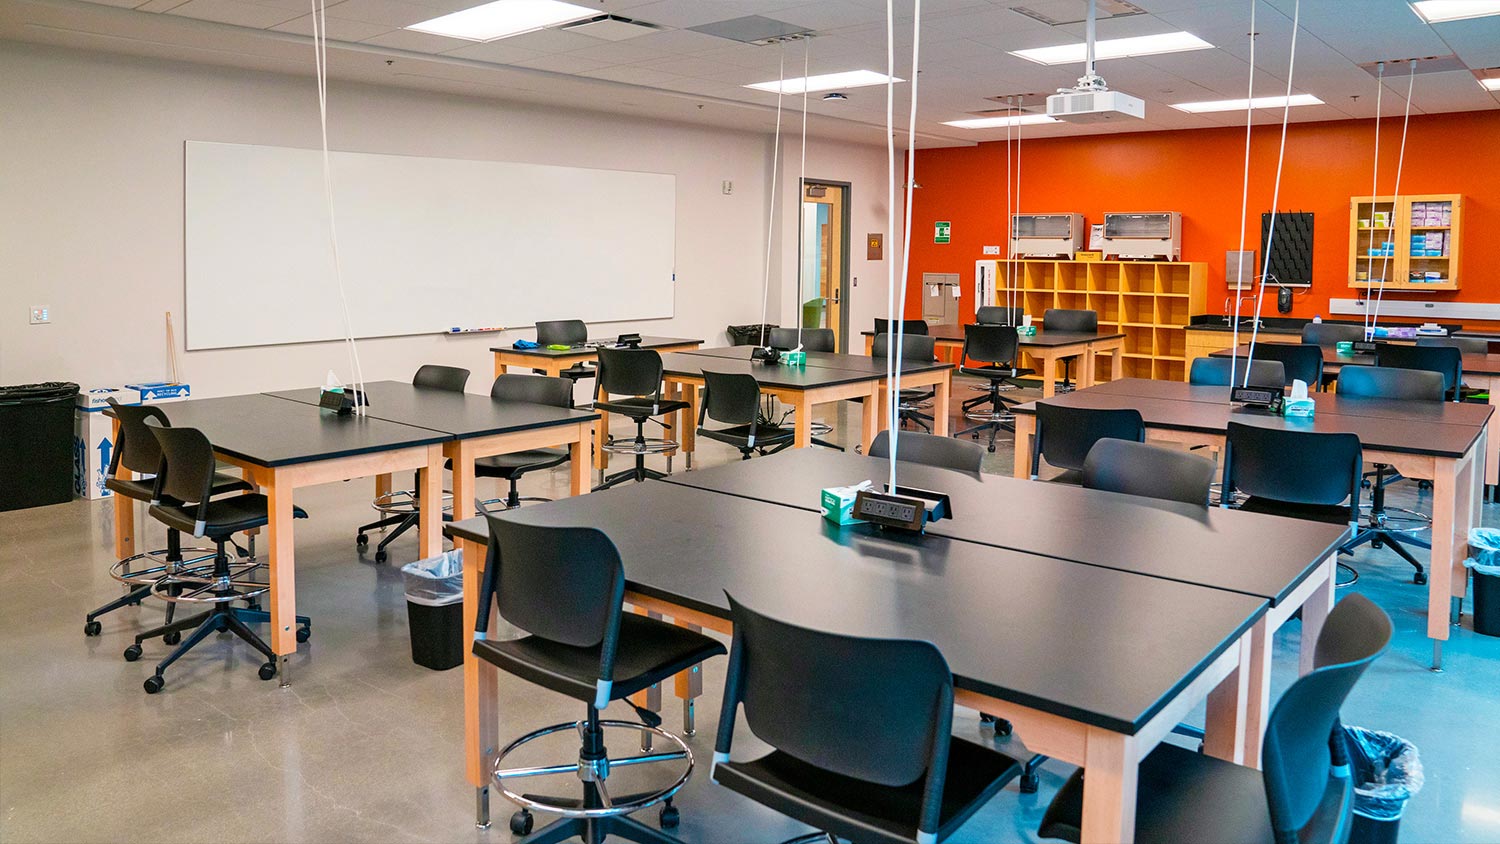 Sixteen rooms located on all five floors of the Apodaca Science Building, including Room 413 shown here, function as 18- to 24-seat lab and prelab spaces. They all share the same AV system design, consisting of a projector that receives wired and wireless content from a ShareLink Pro presentation gateway. Program audio from the projector is sent to two portable assisted listening systems and to Flat Field ceiling speakers via an MDA 3A Audio Distribution Amplifier. The ceiling speakers, four or six depending on room size, are driven by an MPA amplifier. Users operate the AV system through a MediaLink Plus Controller.